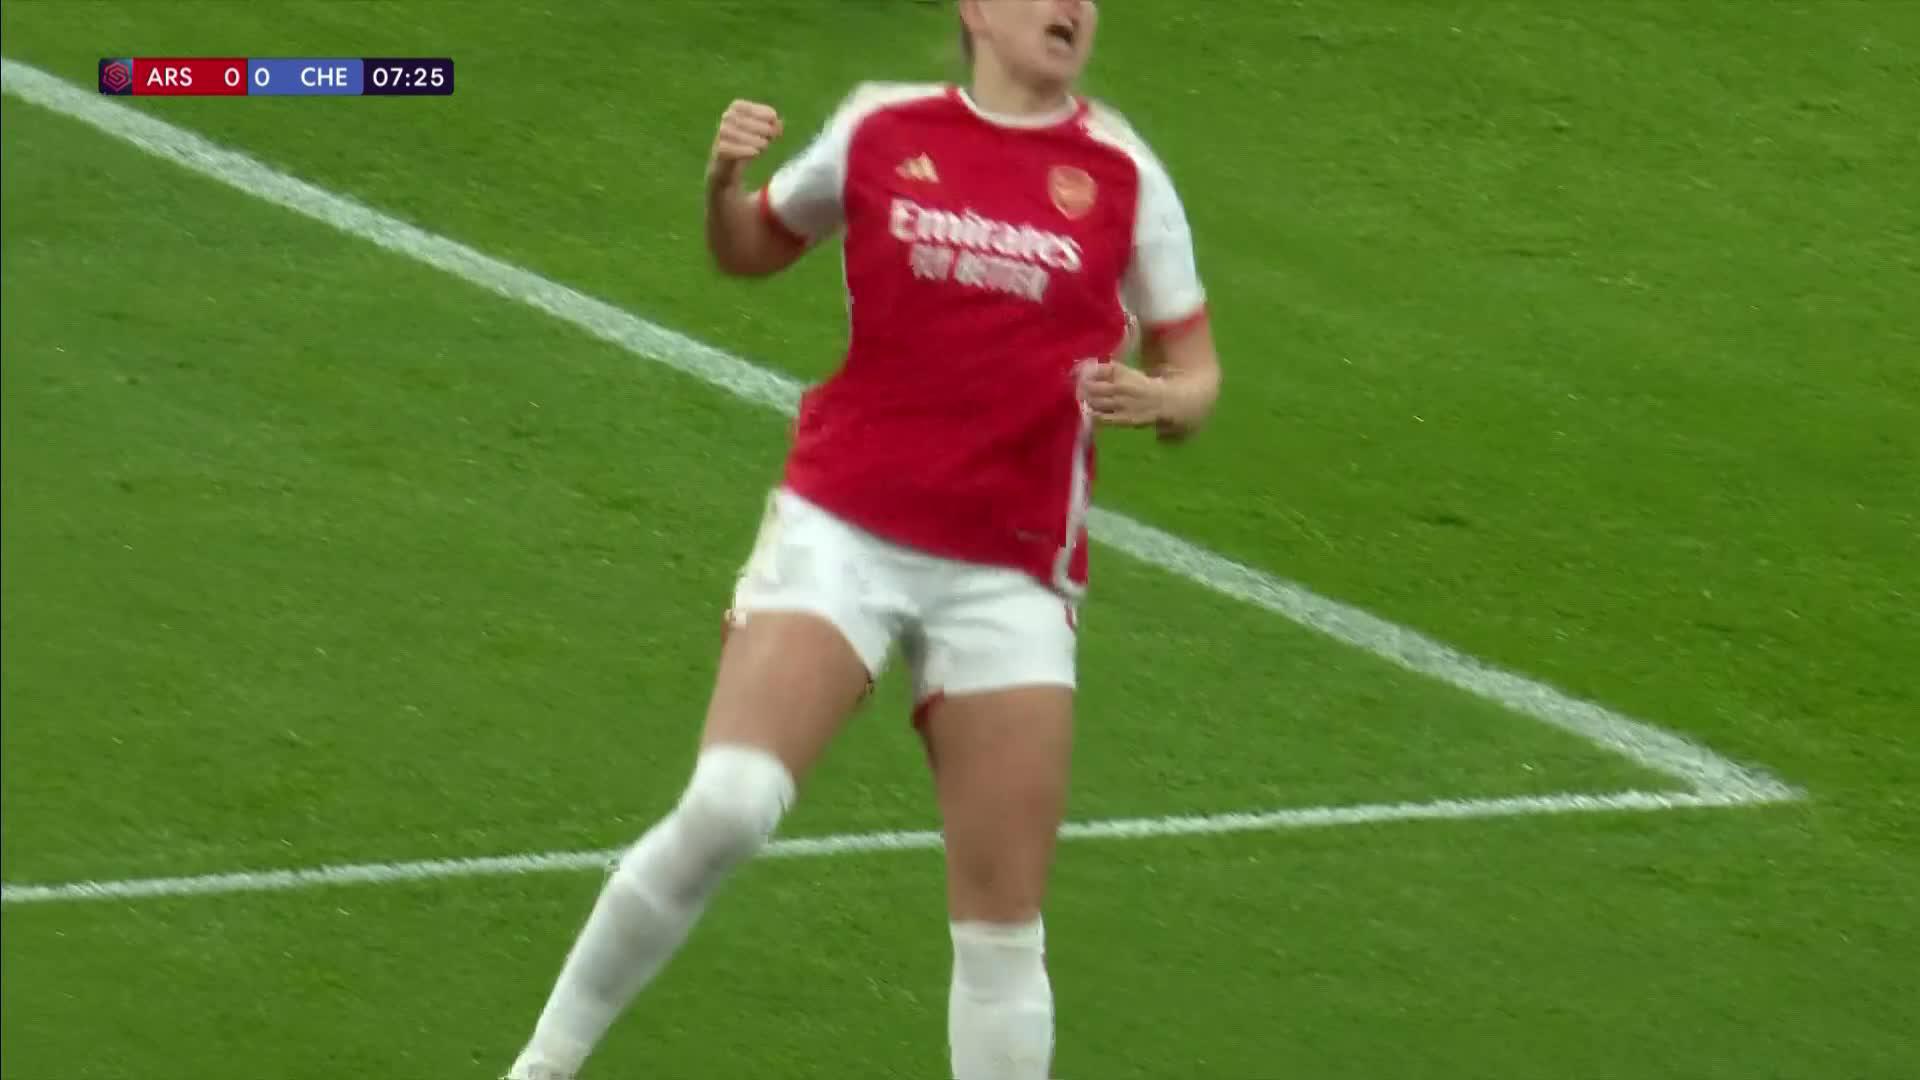 BETH MEAD MAKES THE EMIRATES ERUPT! 😱